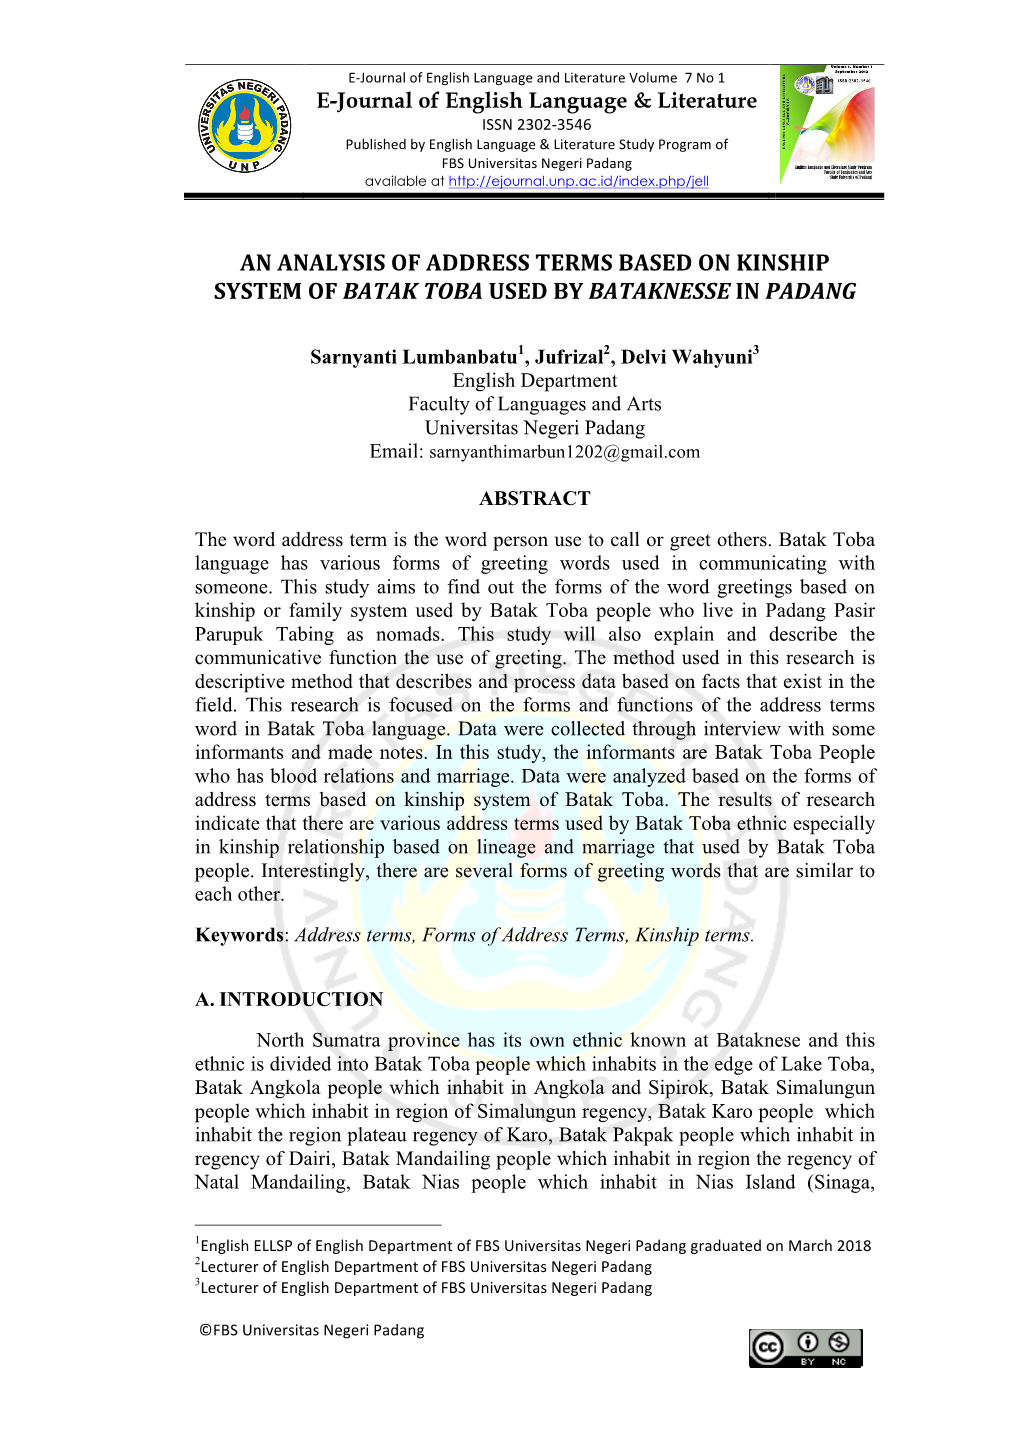 An Analysis of Address Terms Based on Kinship System of Batak Toba Used by Bataknesse in Padang